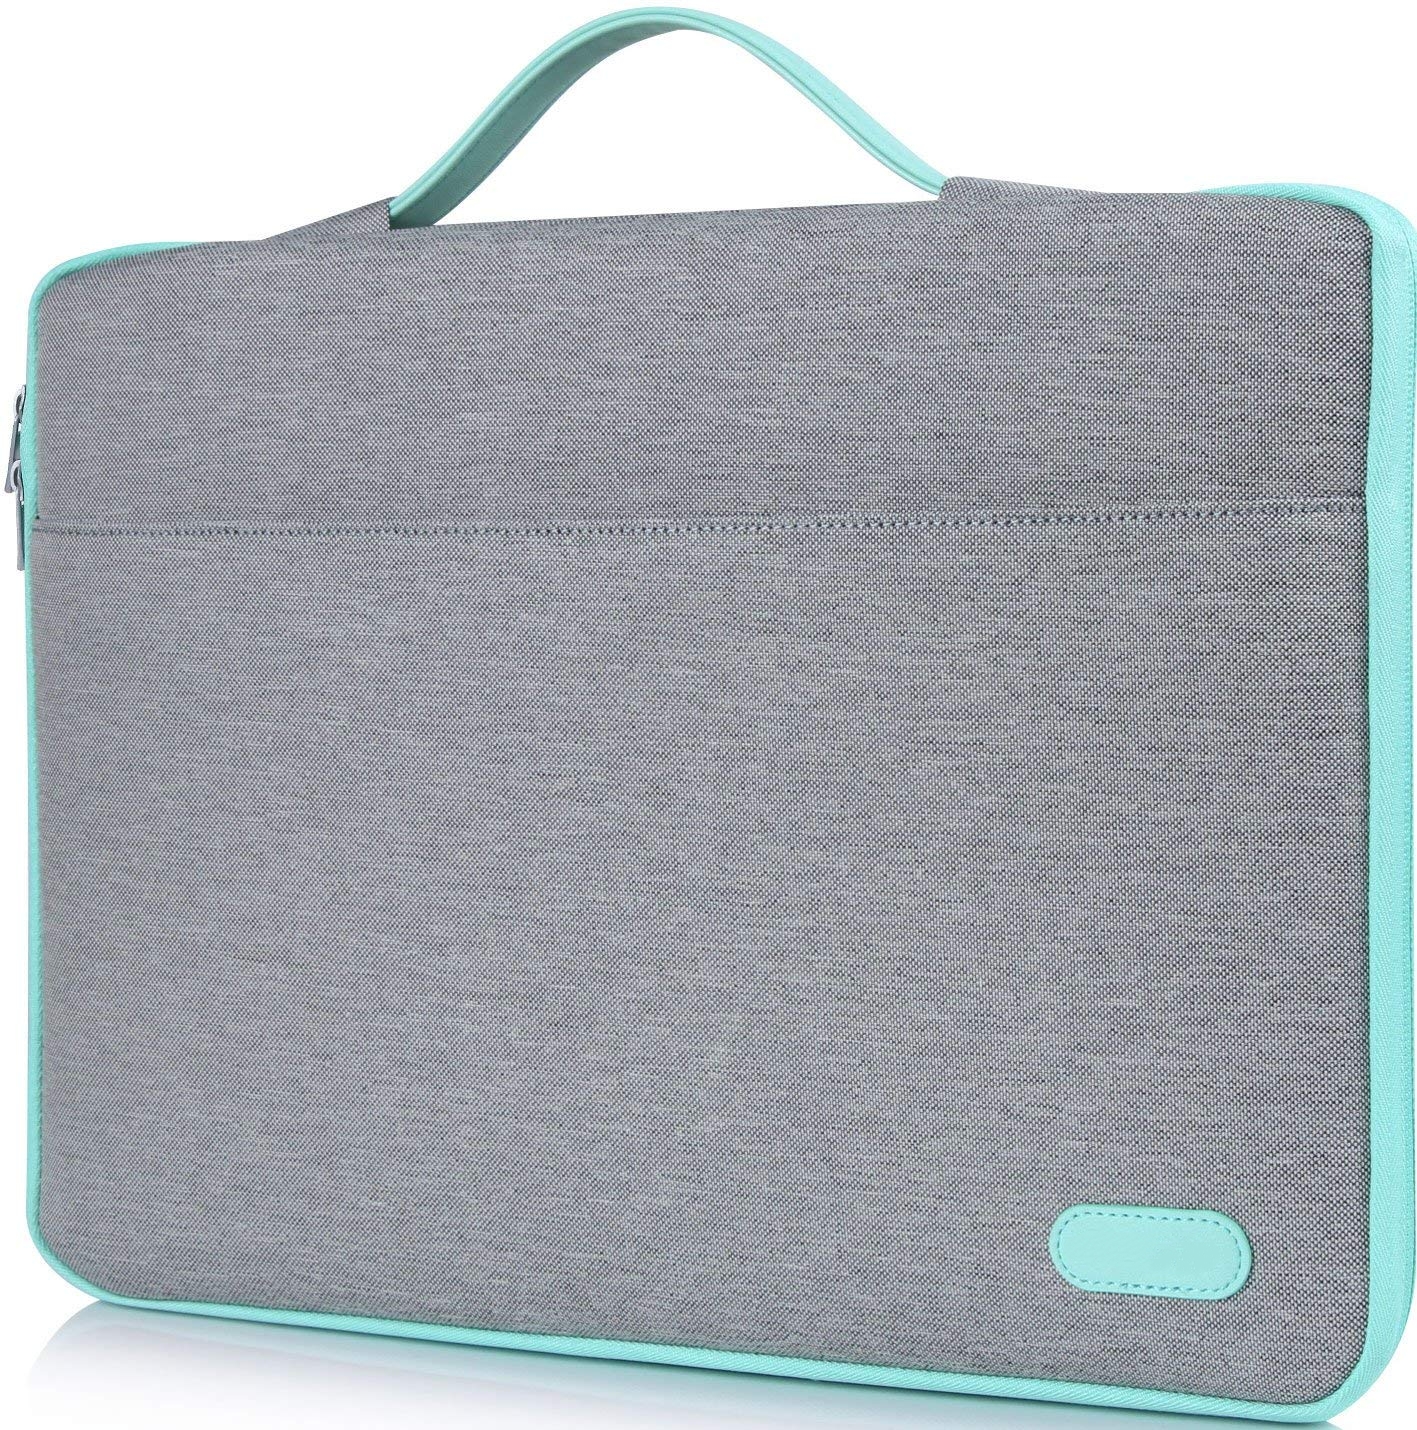 Polyester Ultra-book Notebook Carrying Case Laptop Sleeve